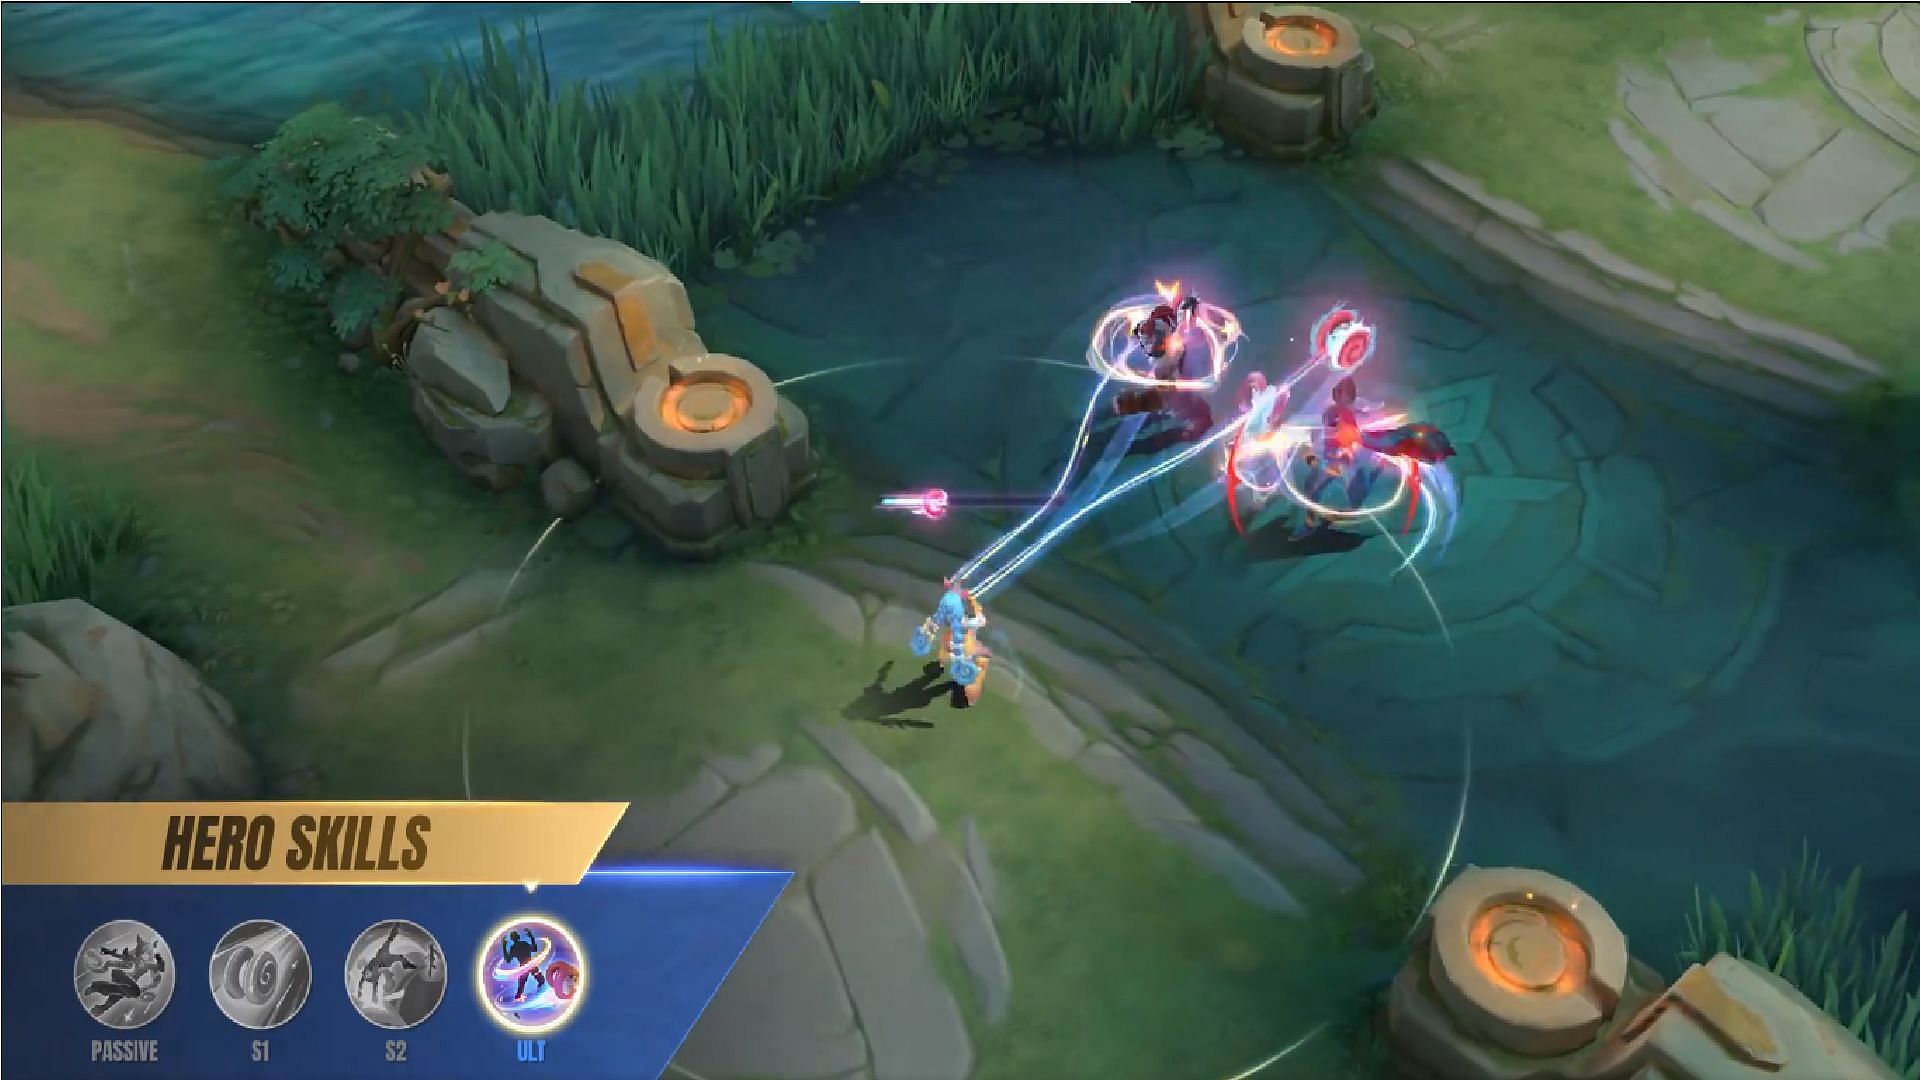 Cici in MLBB uses her ultimate to link two nearby enemies and deal damage simultaneously to them (Image via Moonton Games)